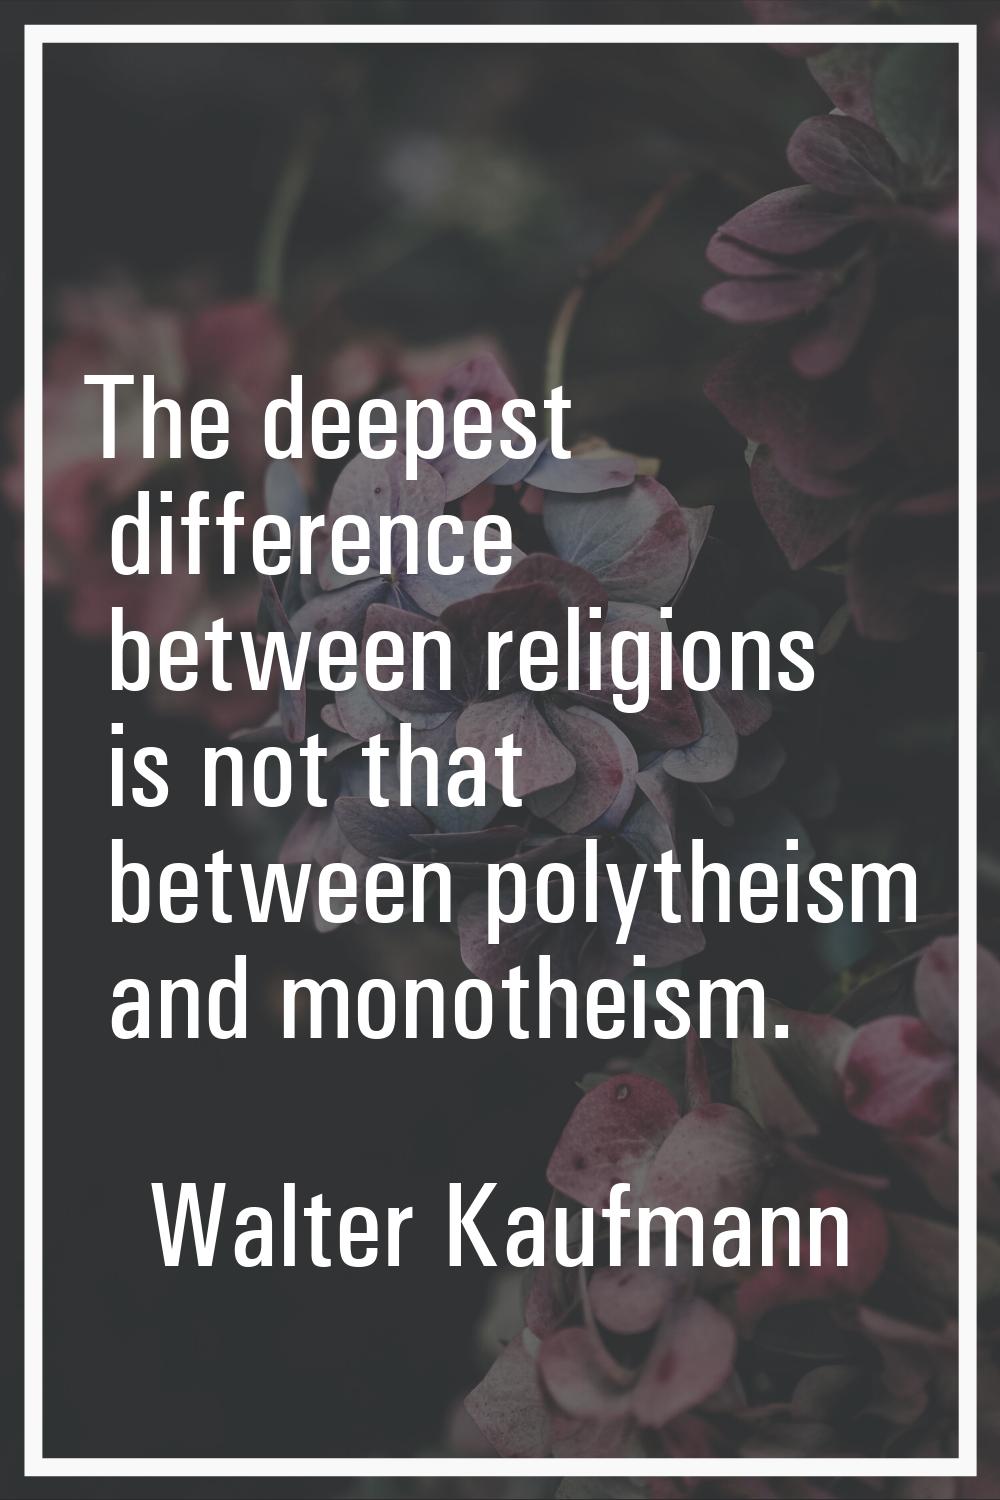 The deepest difference between religions is not that between polytheism and monotheism.